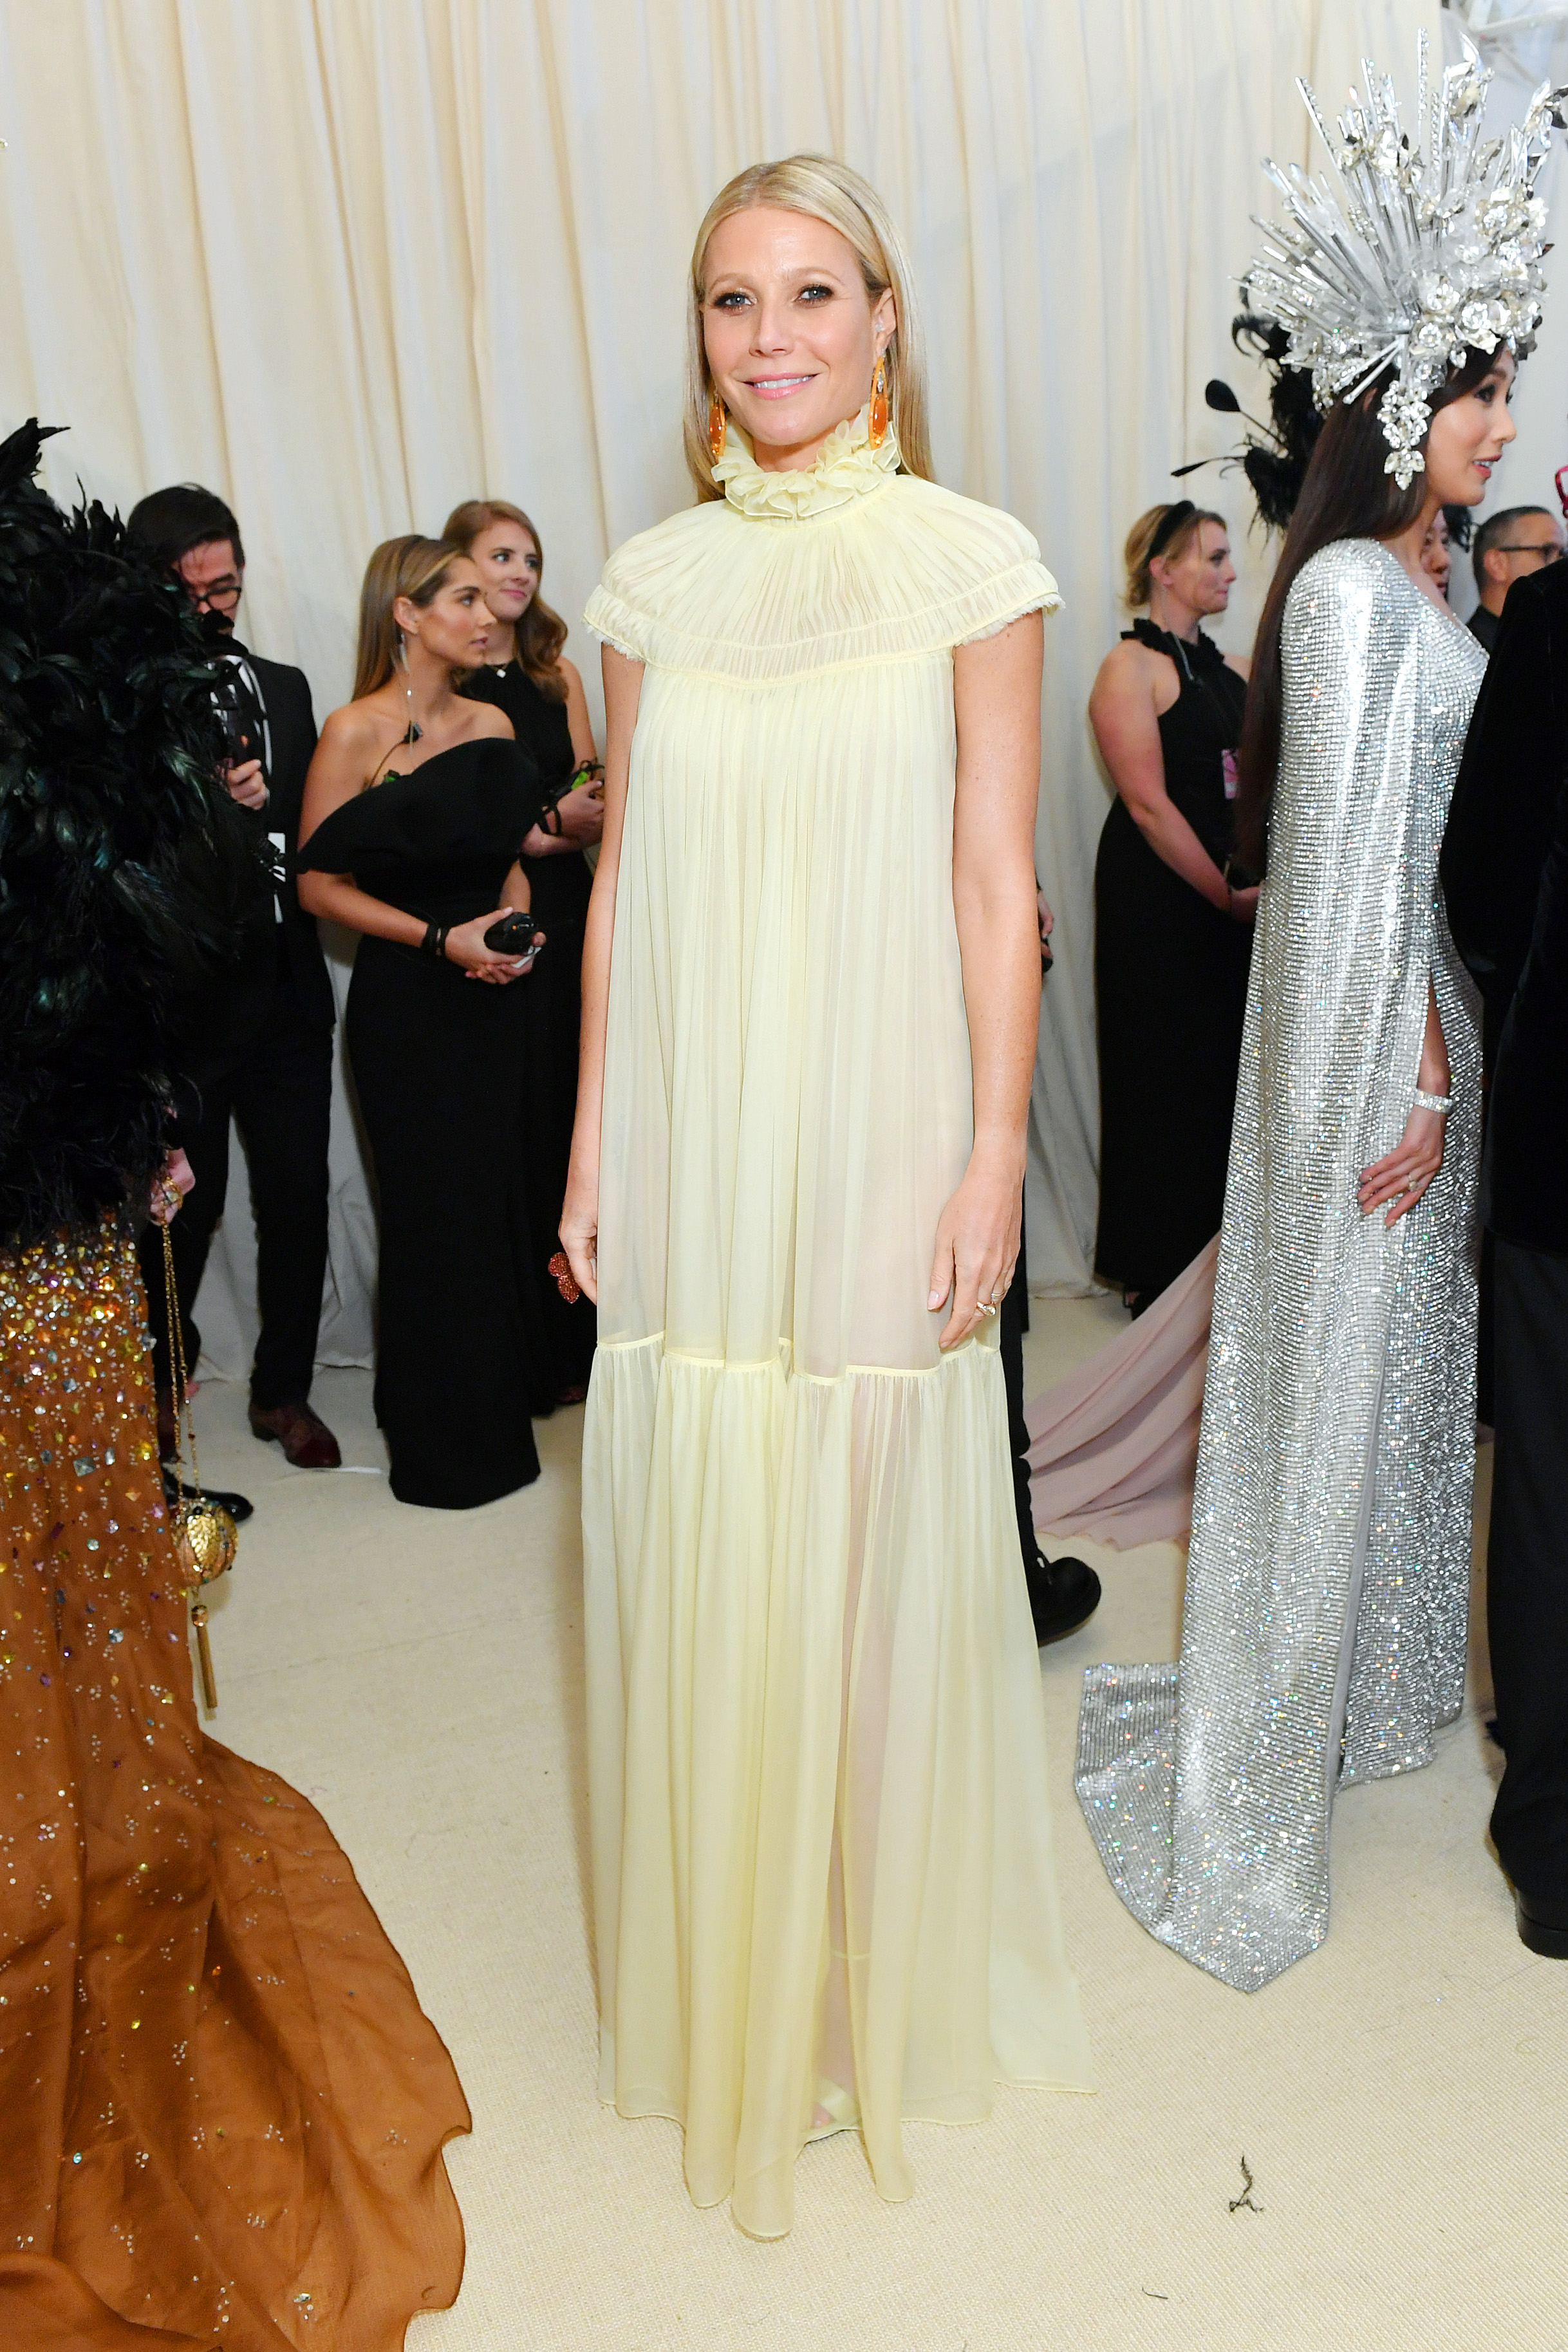 Gwyneth Paltrow at the 2019 Met Gala in New York | Source: Getty Images